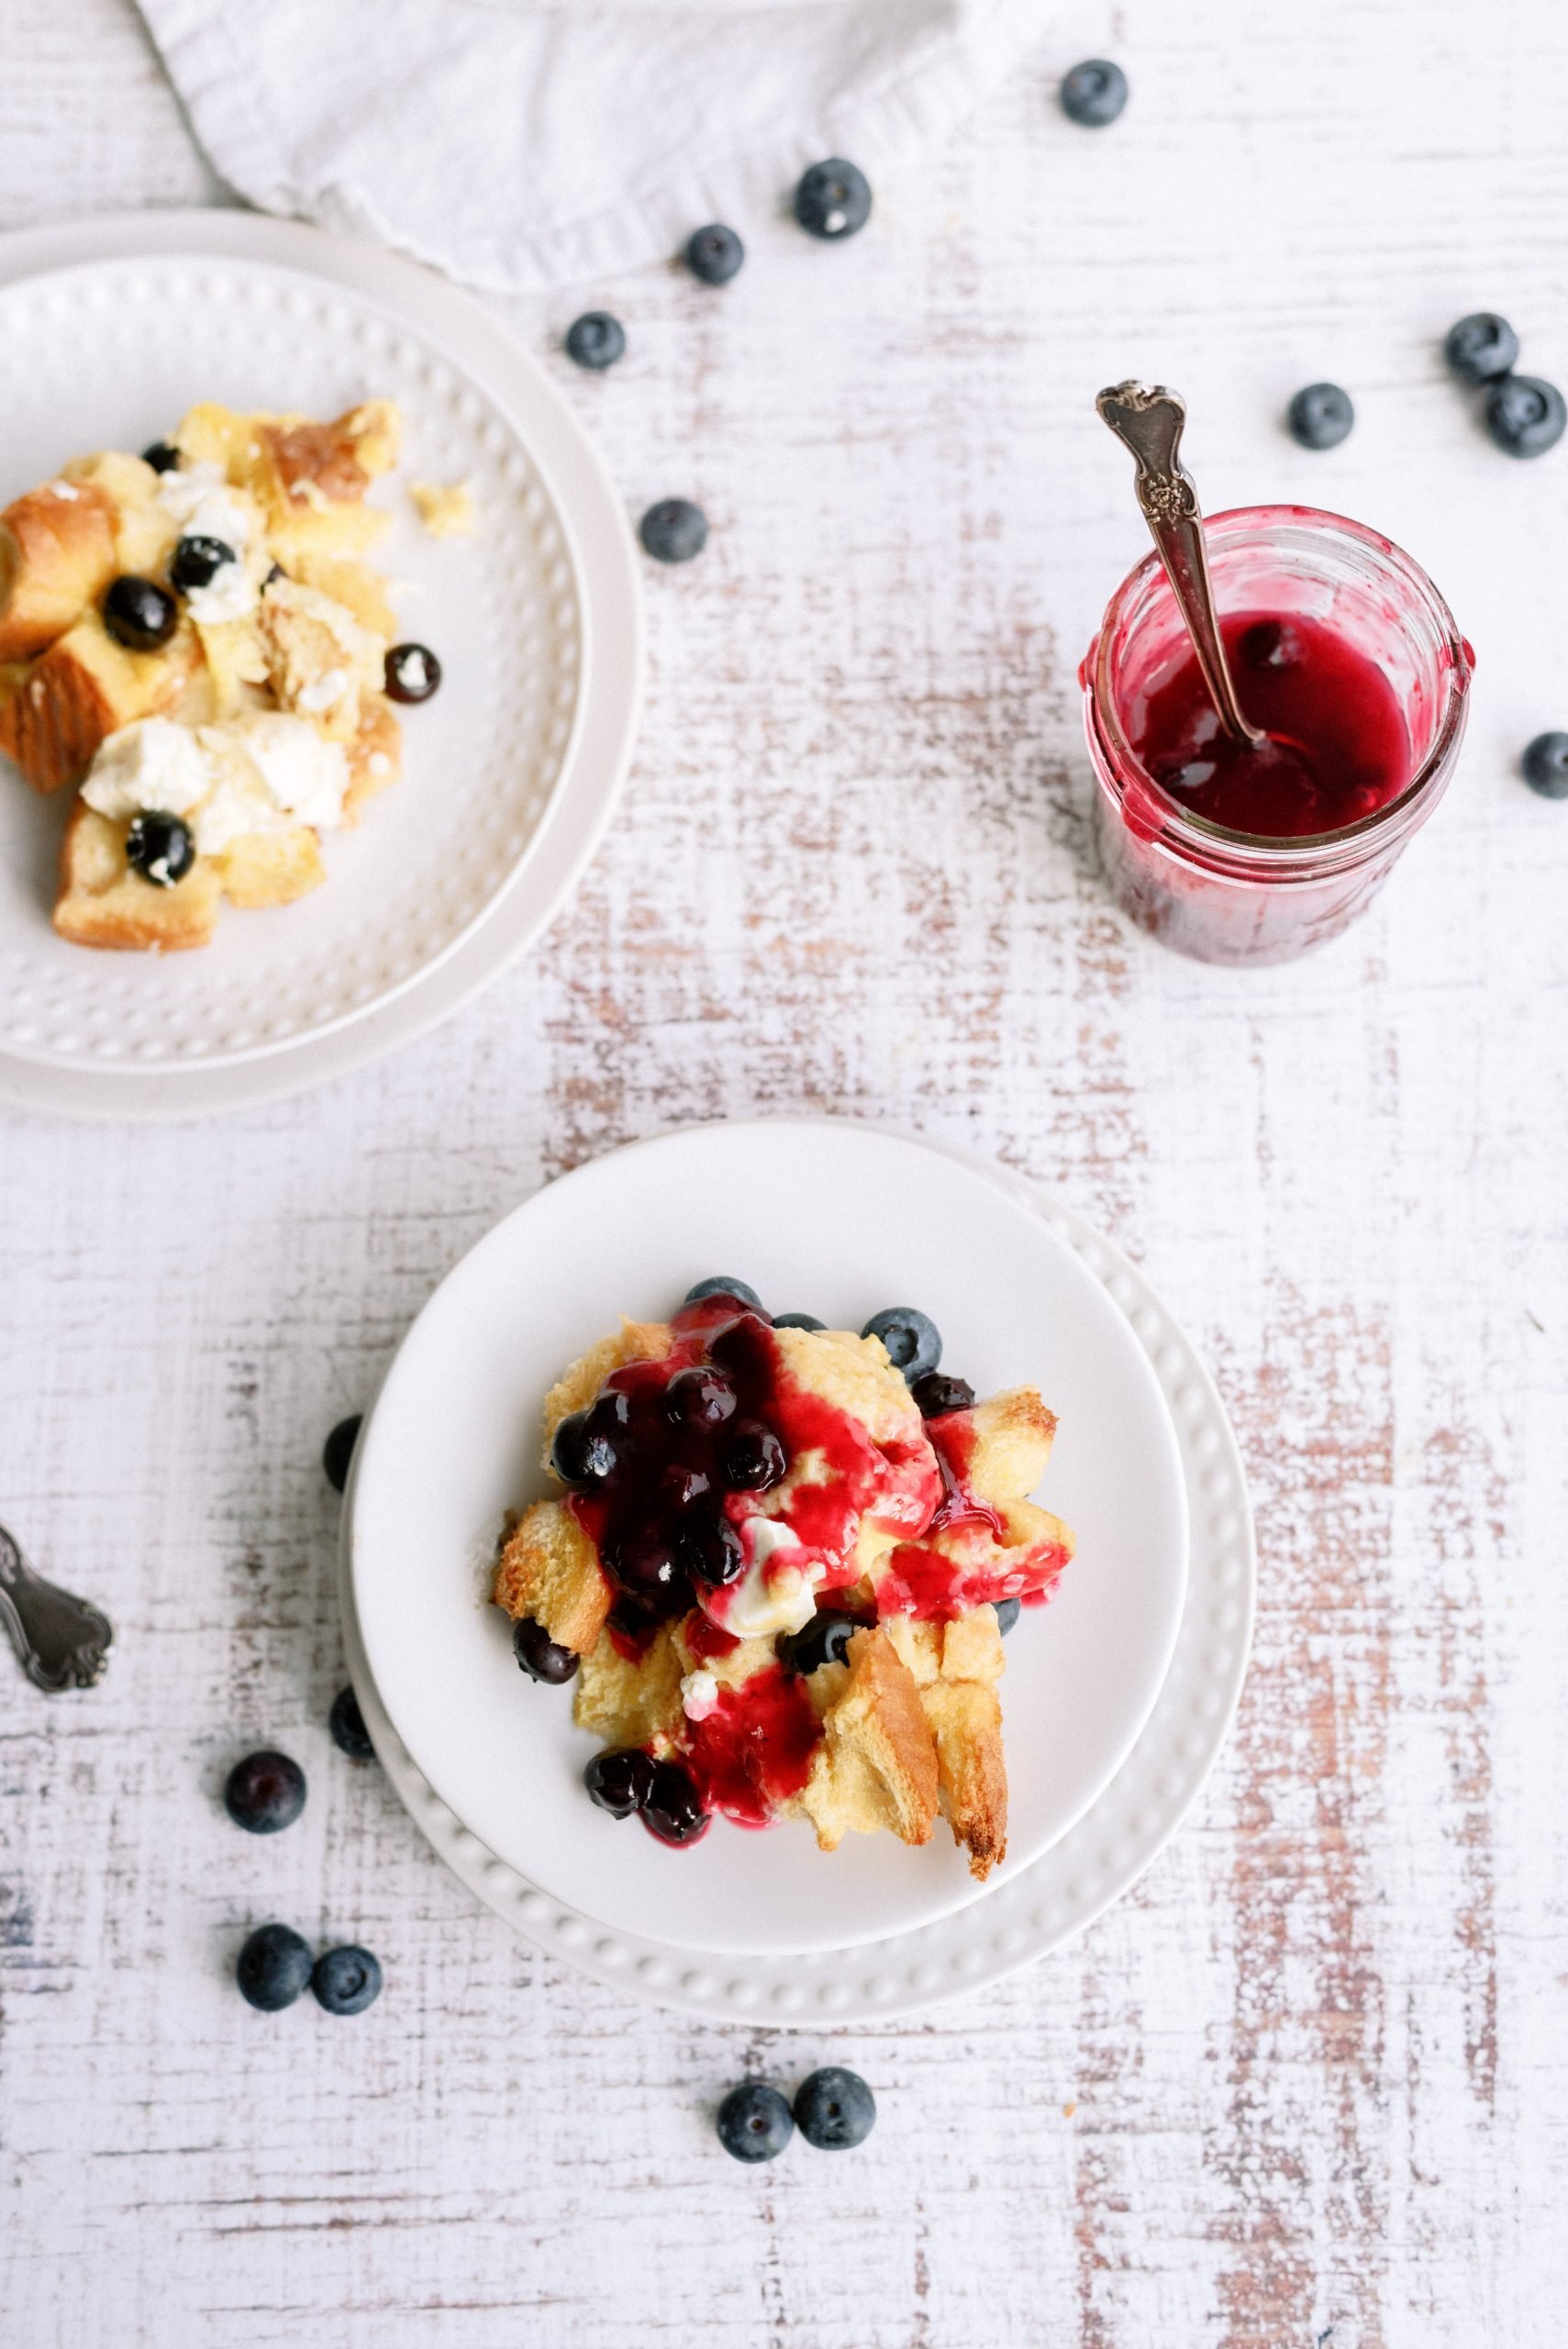 Slice of Overnight Blueberry French Toast on a plate